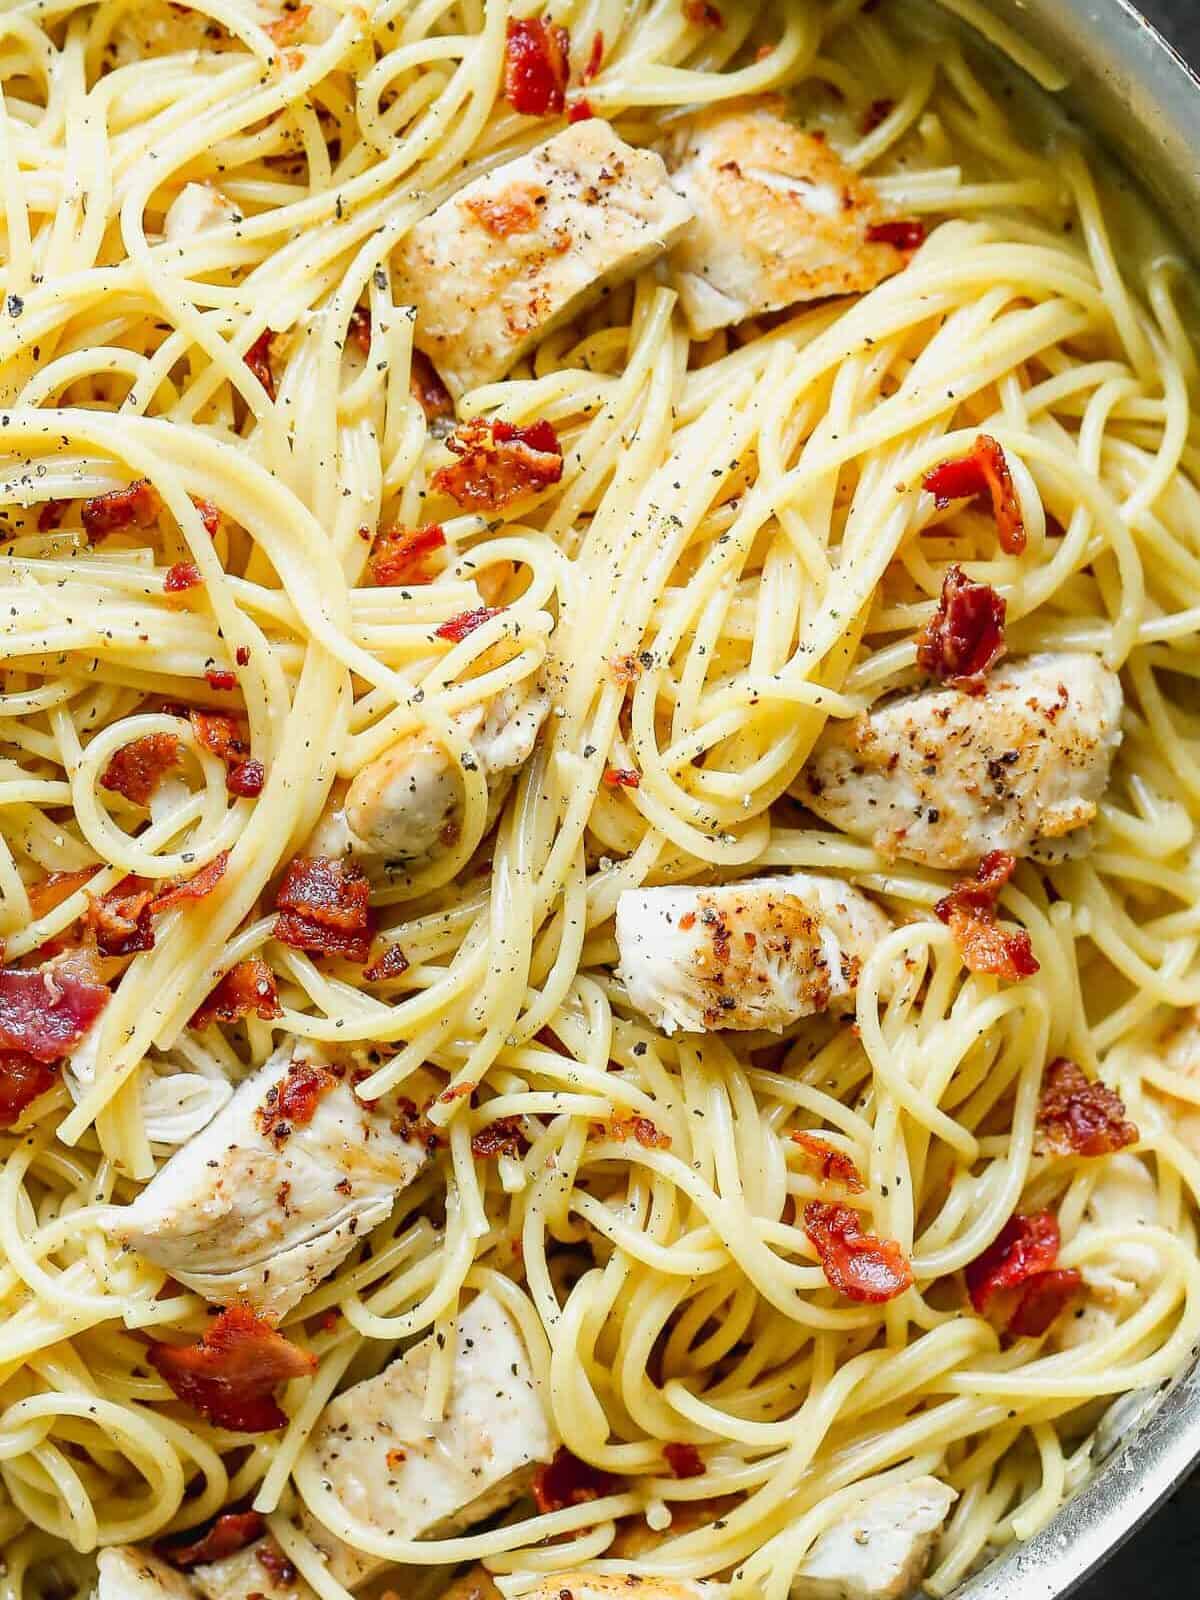 up close image of pasta with cream sauce, bacon, and chicken